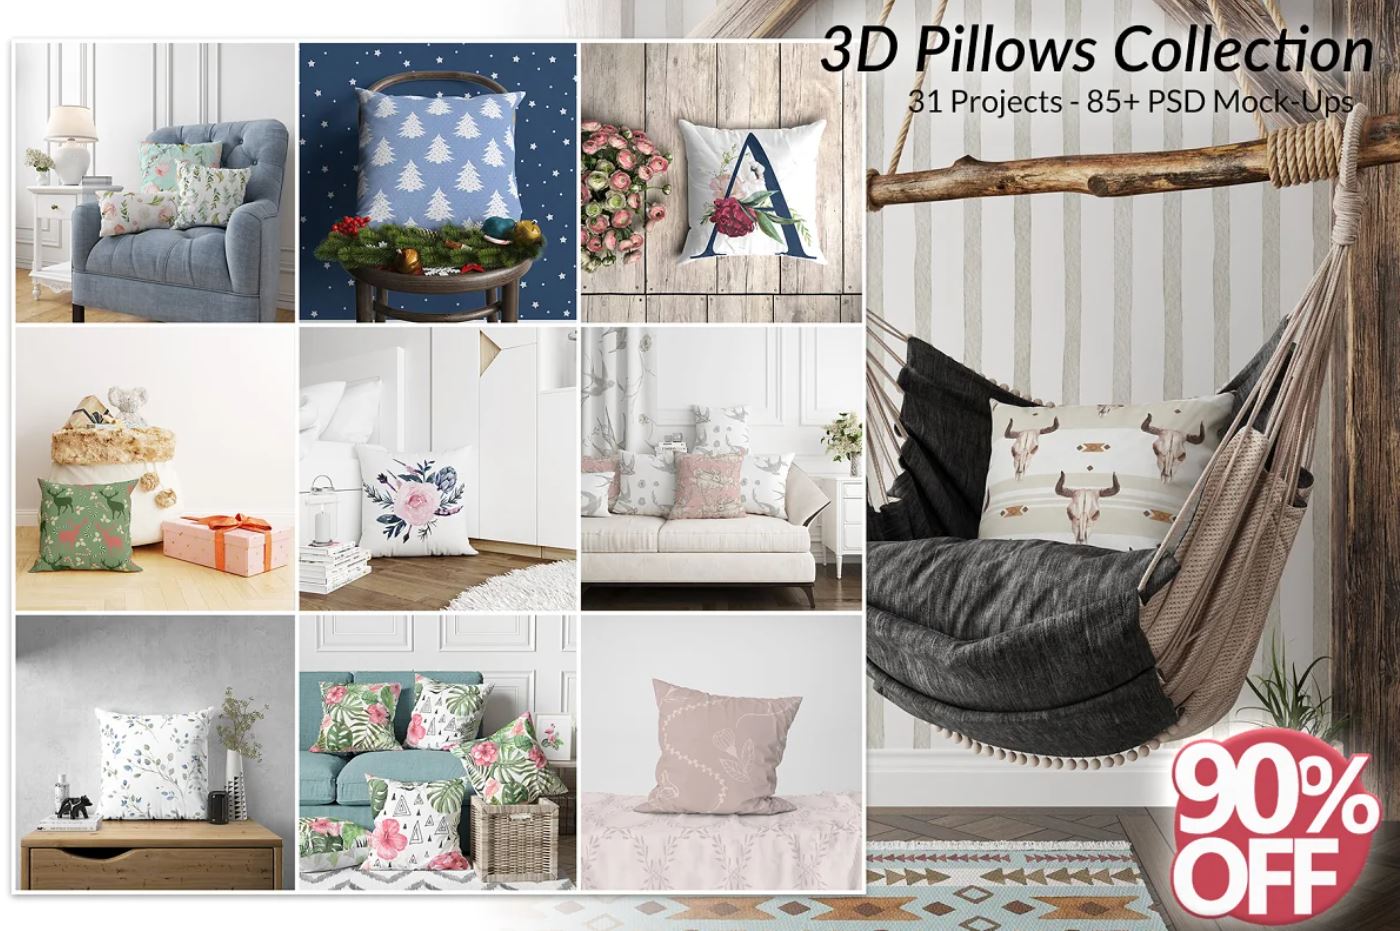 High quality pillow mockup collections set